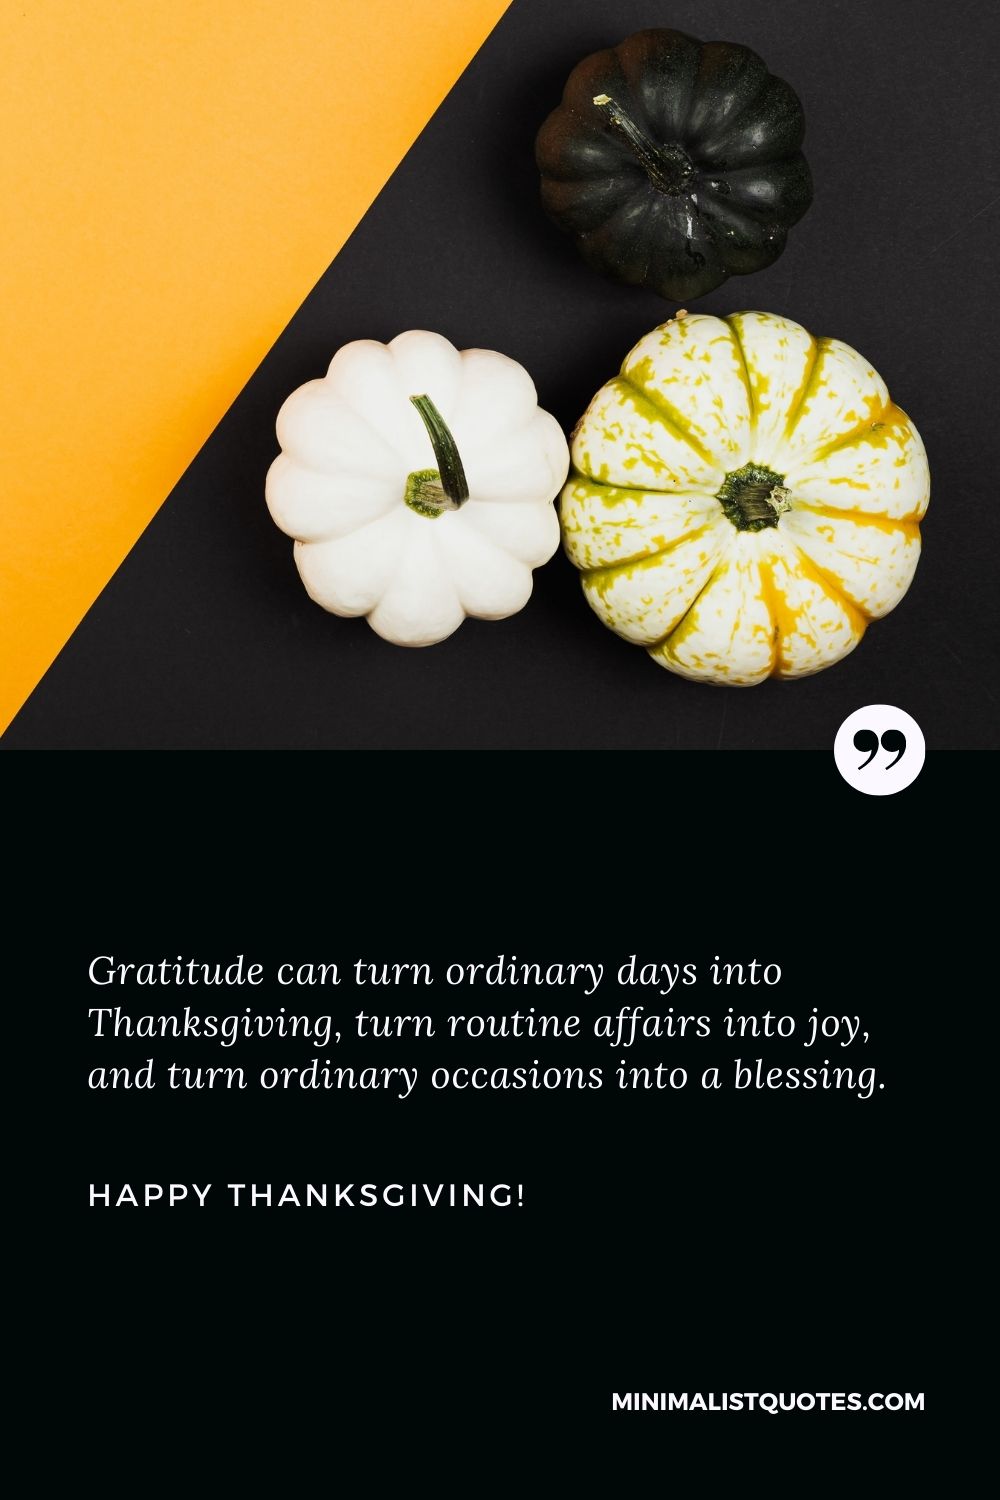 Thanksgiving phrases: Gratitude can turn ordinary days into Thanksgiving, turn routine affairs into joy, and turn ordinary occasions into a blessing. Happy Thanksgiving!